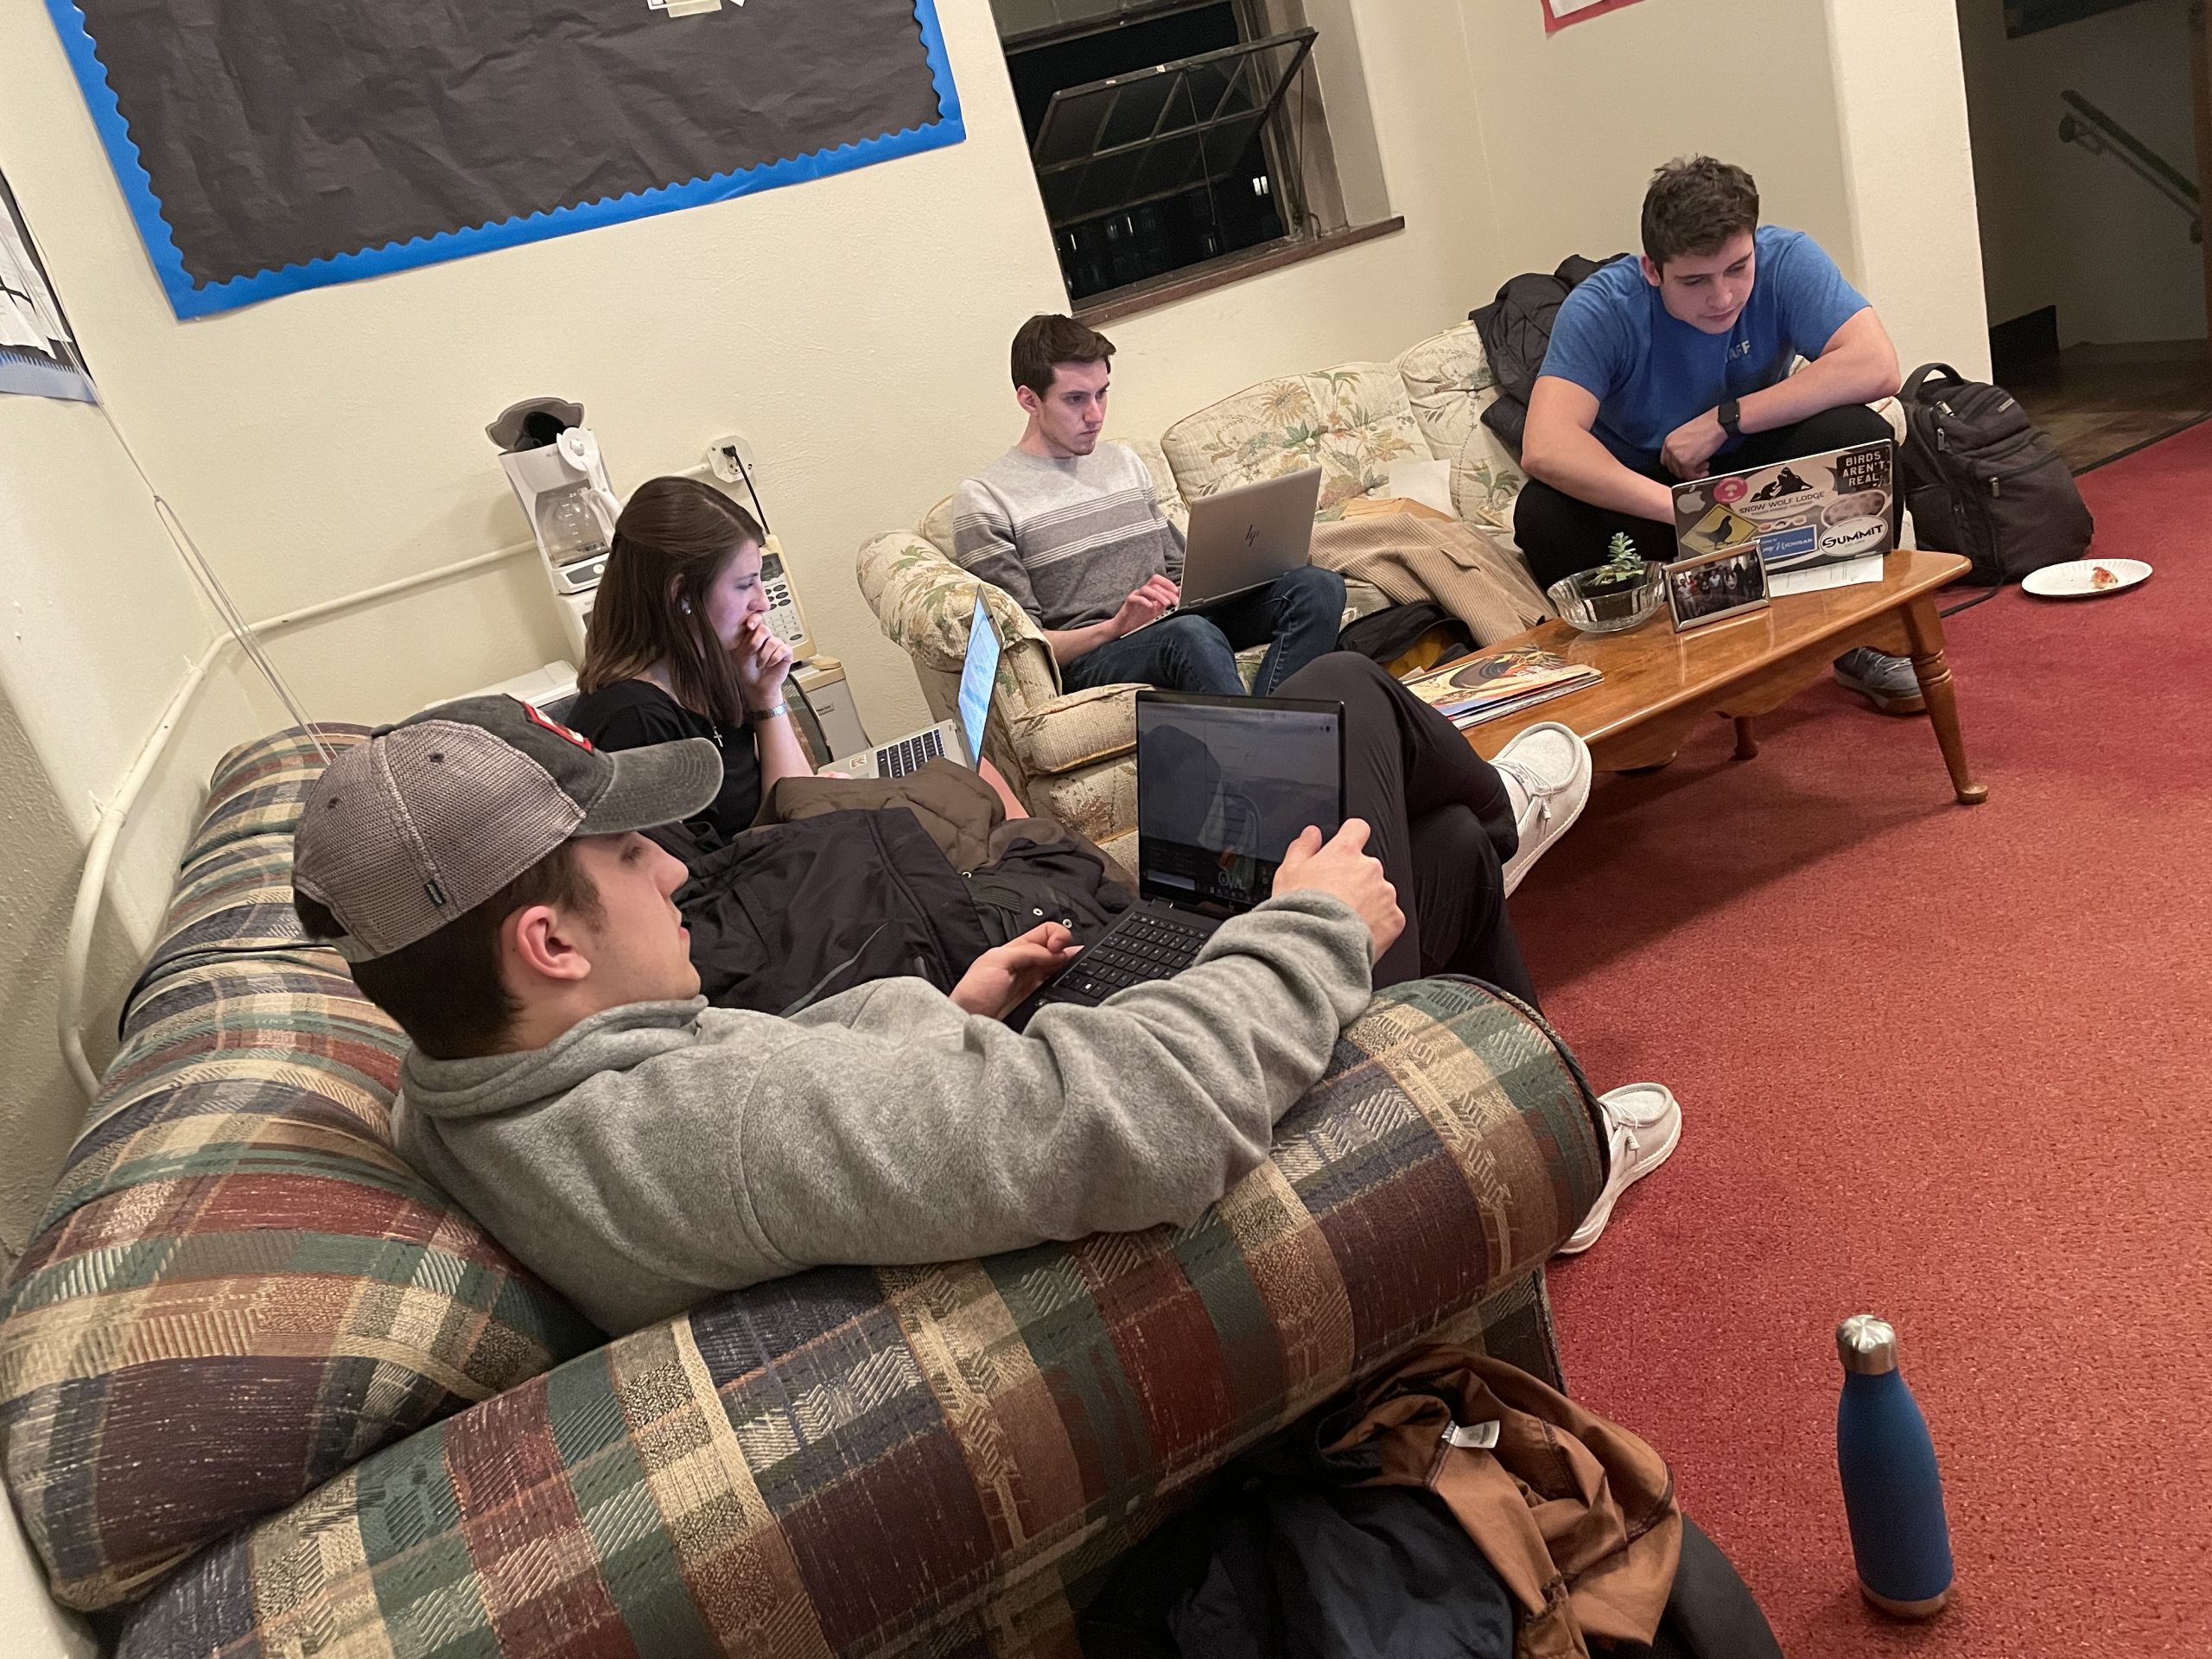 Collegian staffers work on stories on well-worn couches amid pizza detritus in the Keystone Student Media Award-winning weekly’s office in the tower of Crawford